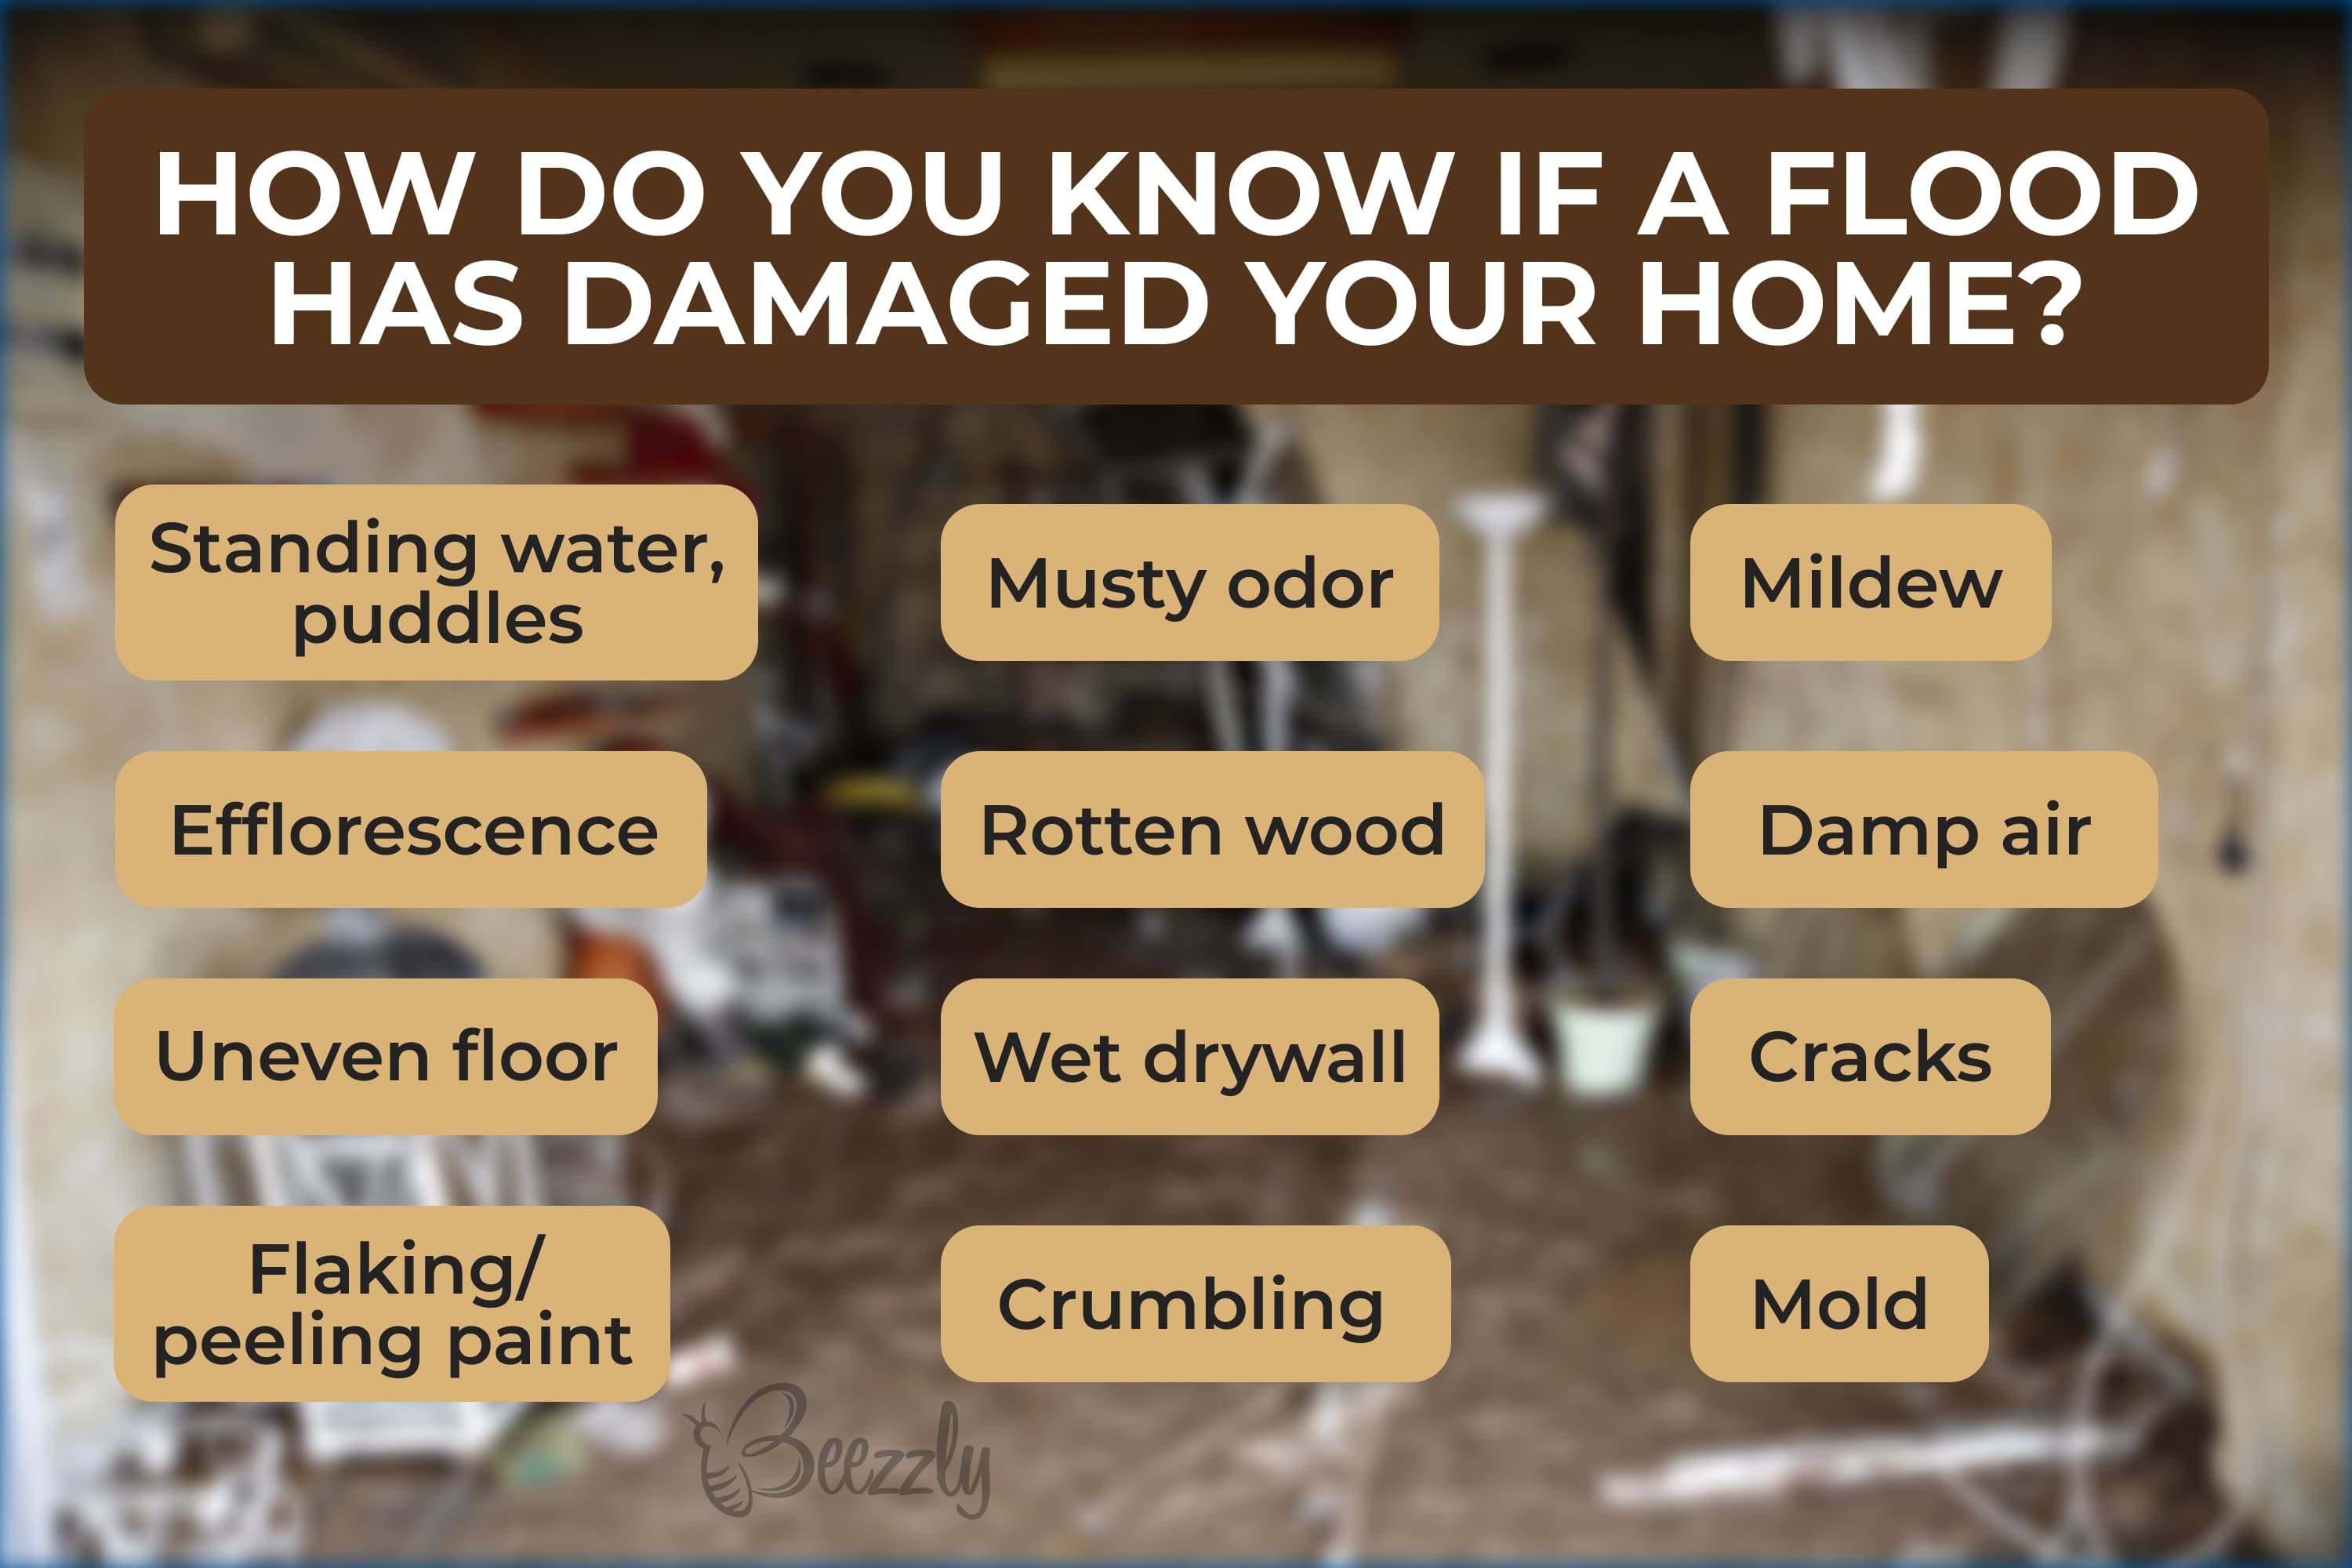 How do you know if a flood has damaged your home